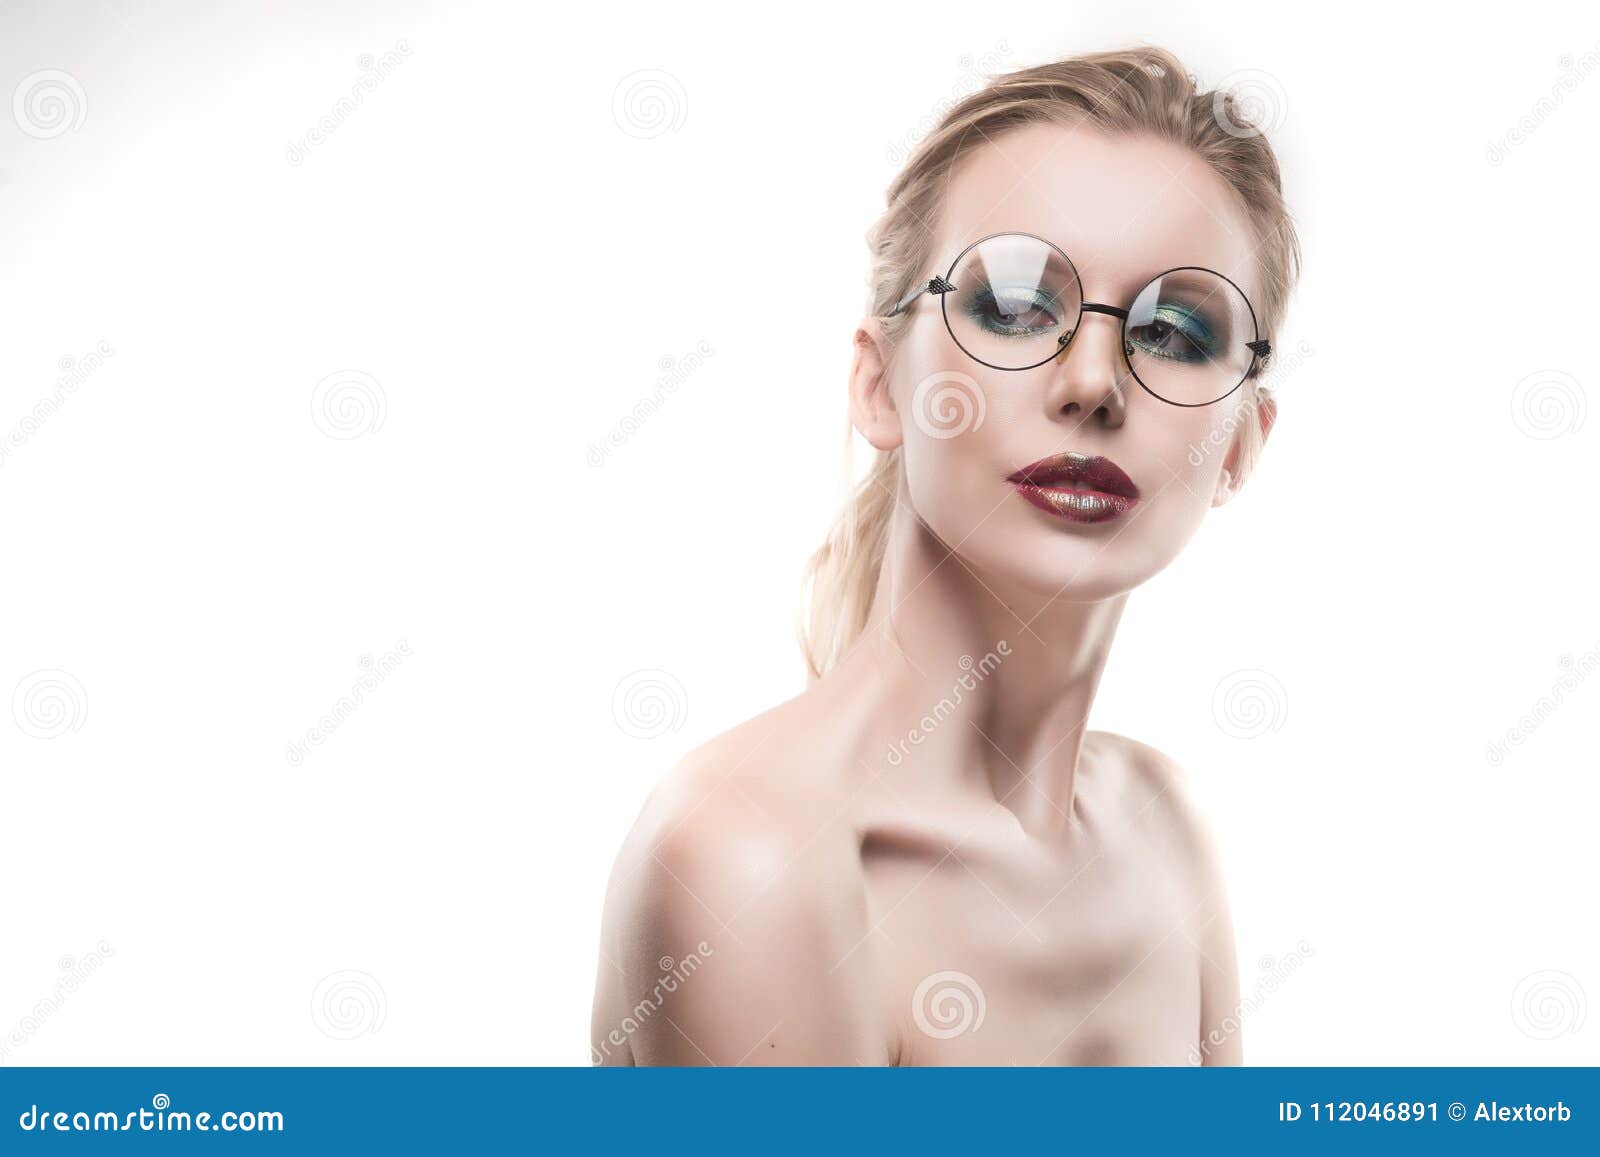 Hot Naked Women With Glasses